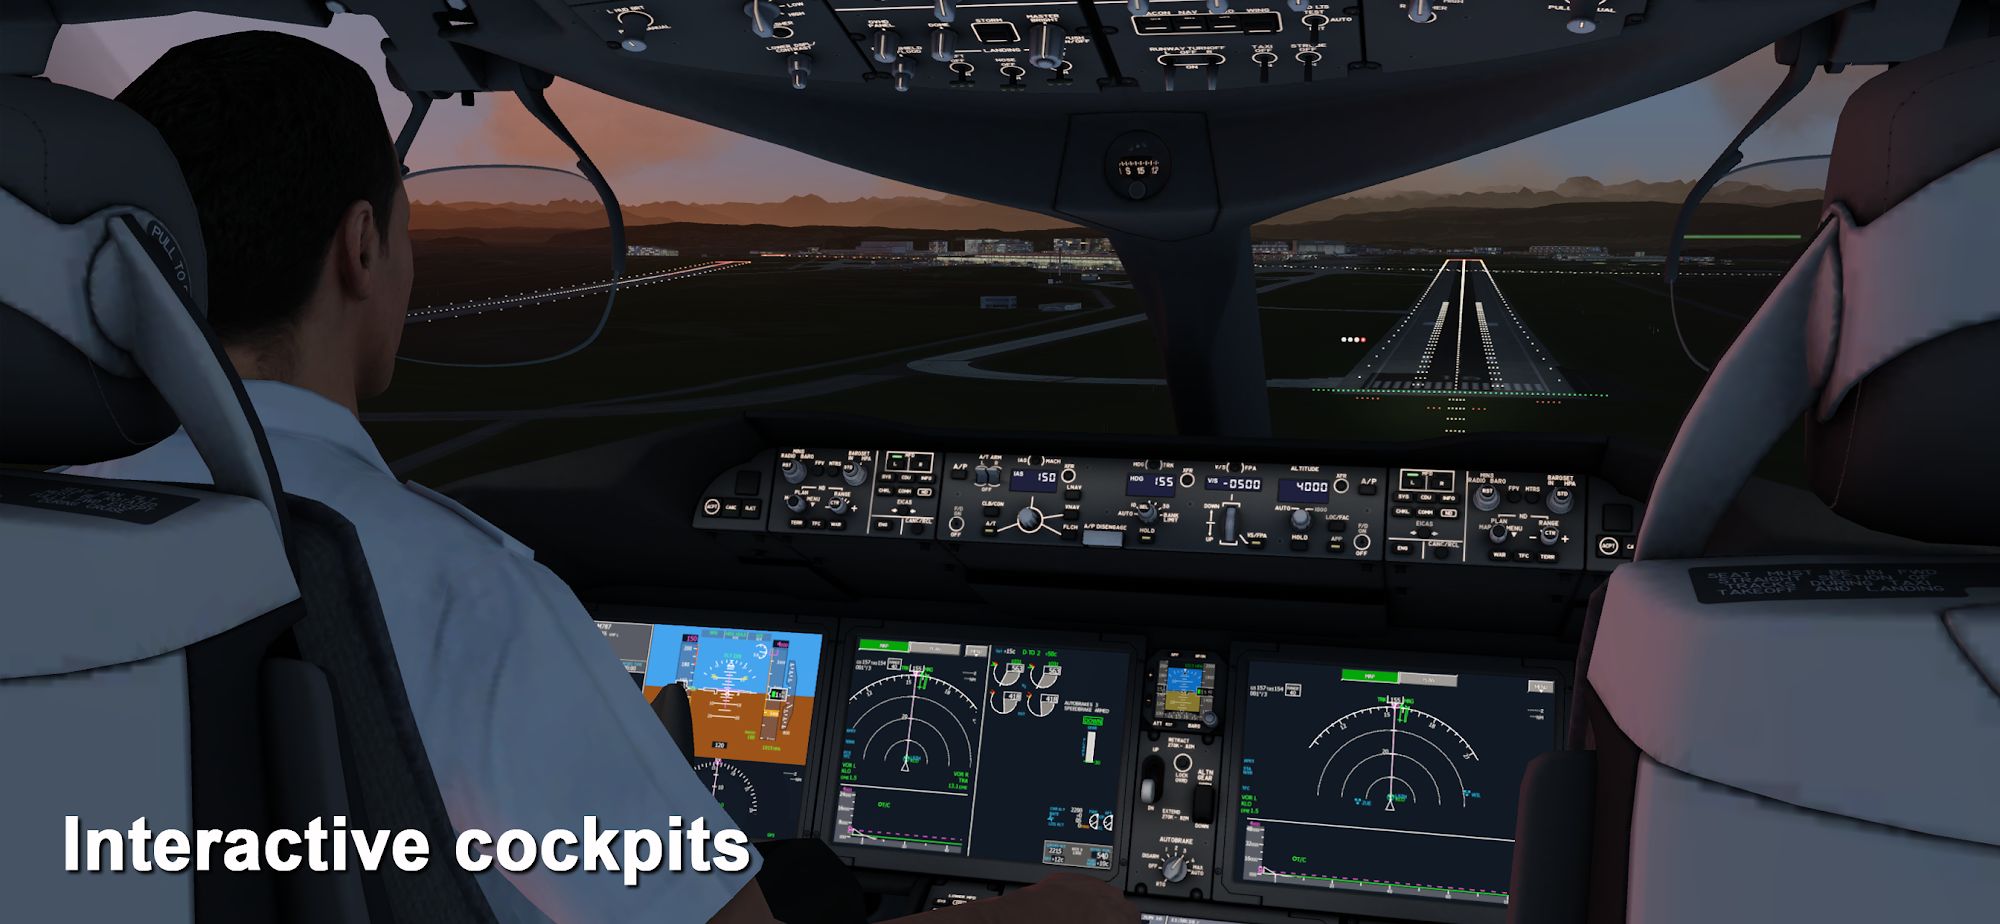 Stream Download RFS - Real Flight Simulator APK for Free with APKPure and  Fly Like a Pro on Your Android D by Georgie